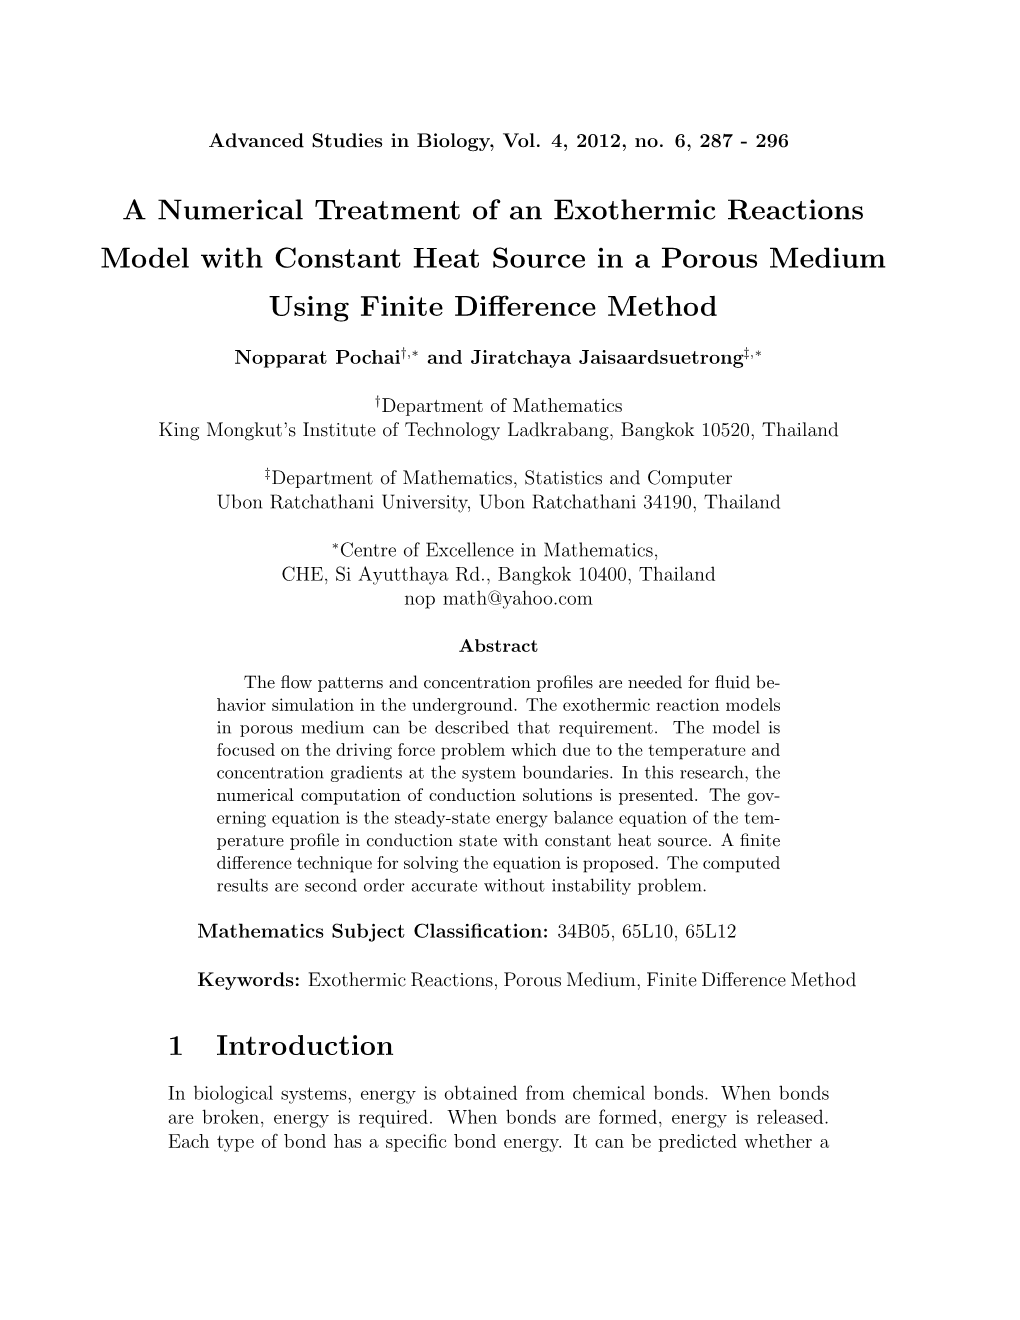 A Numerical Treatment of an Exothermic Reactions Model with Constant Heat Source in a Porous Medium Using Finite Diﬀerence Method